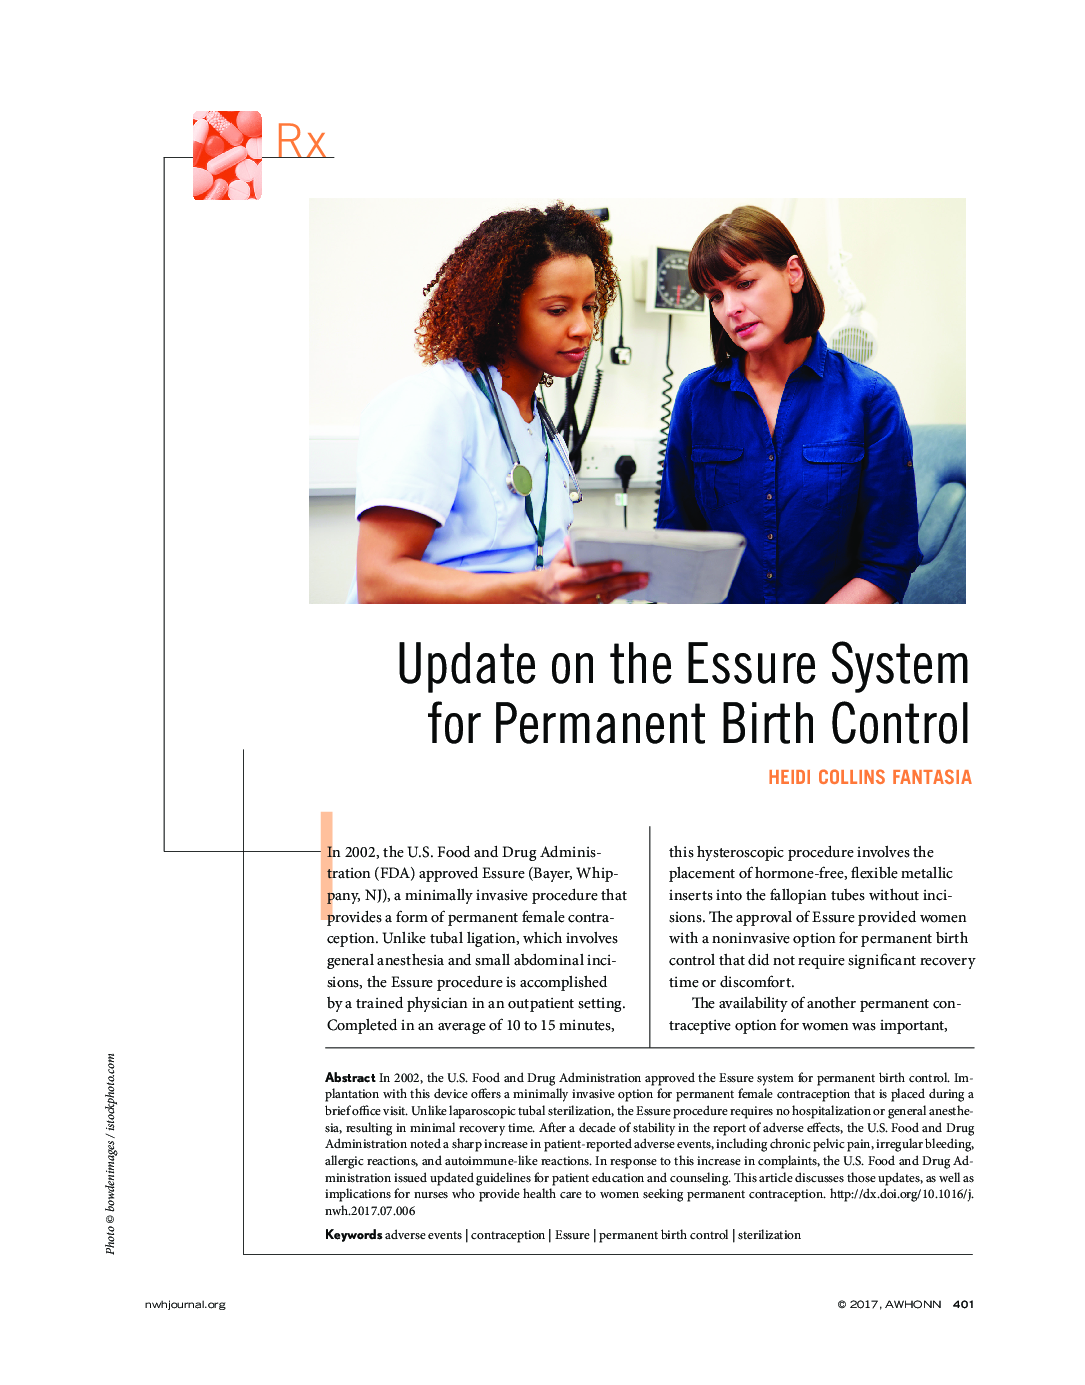 Update on the Essure System for Permanent Birth Control